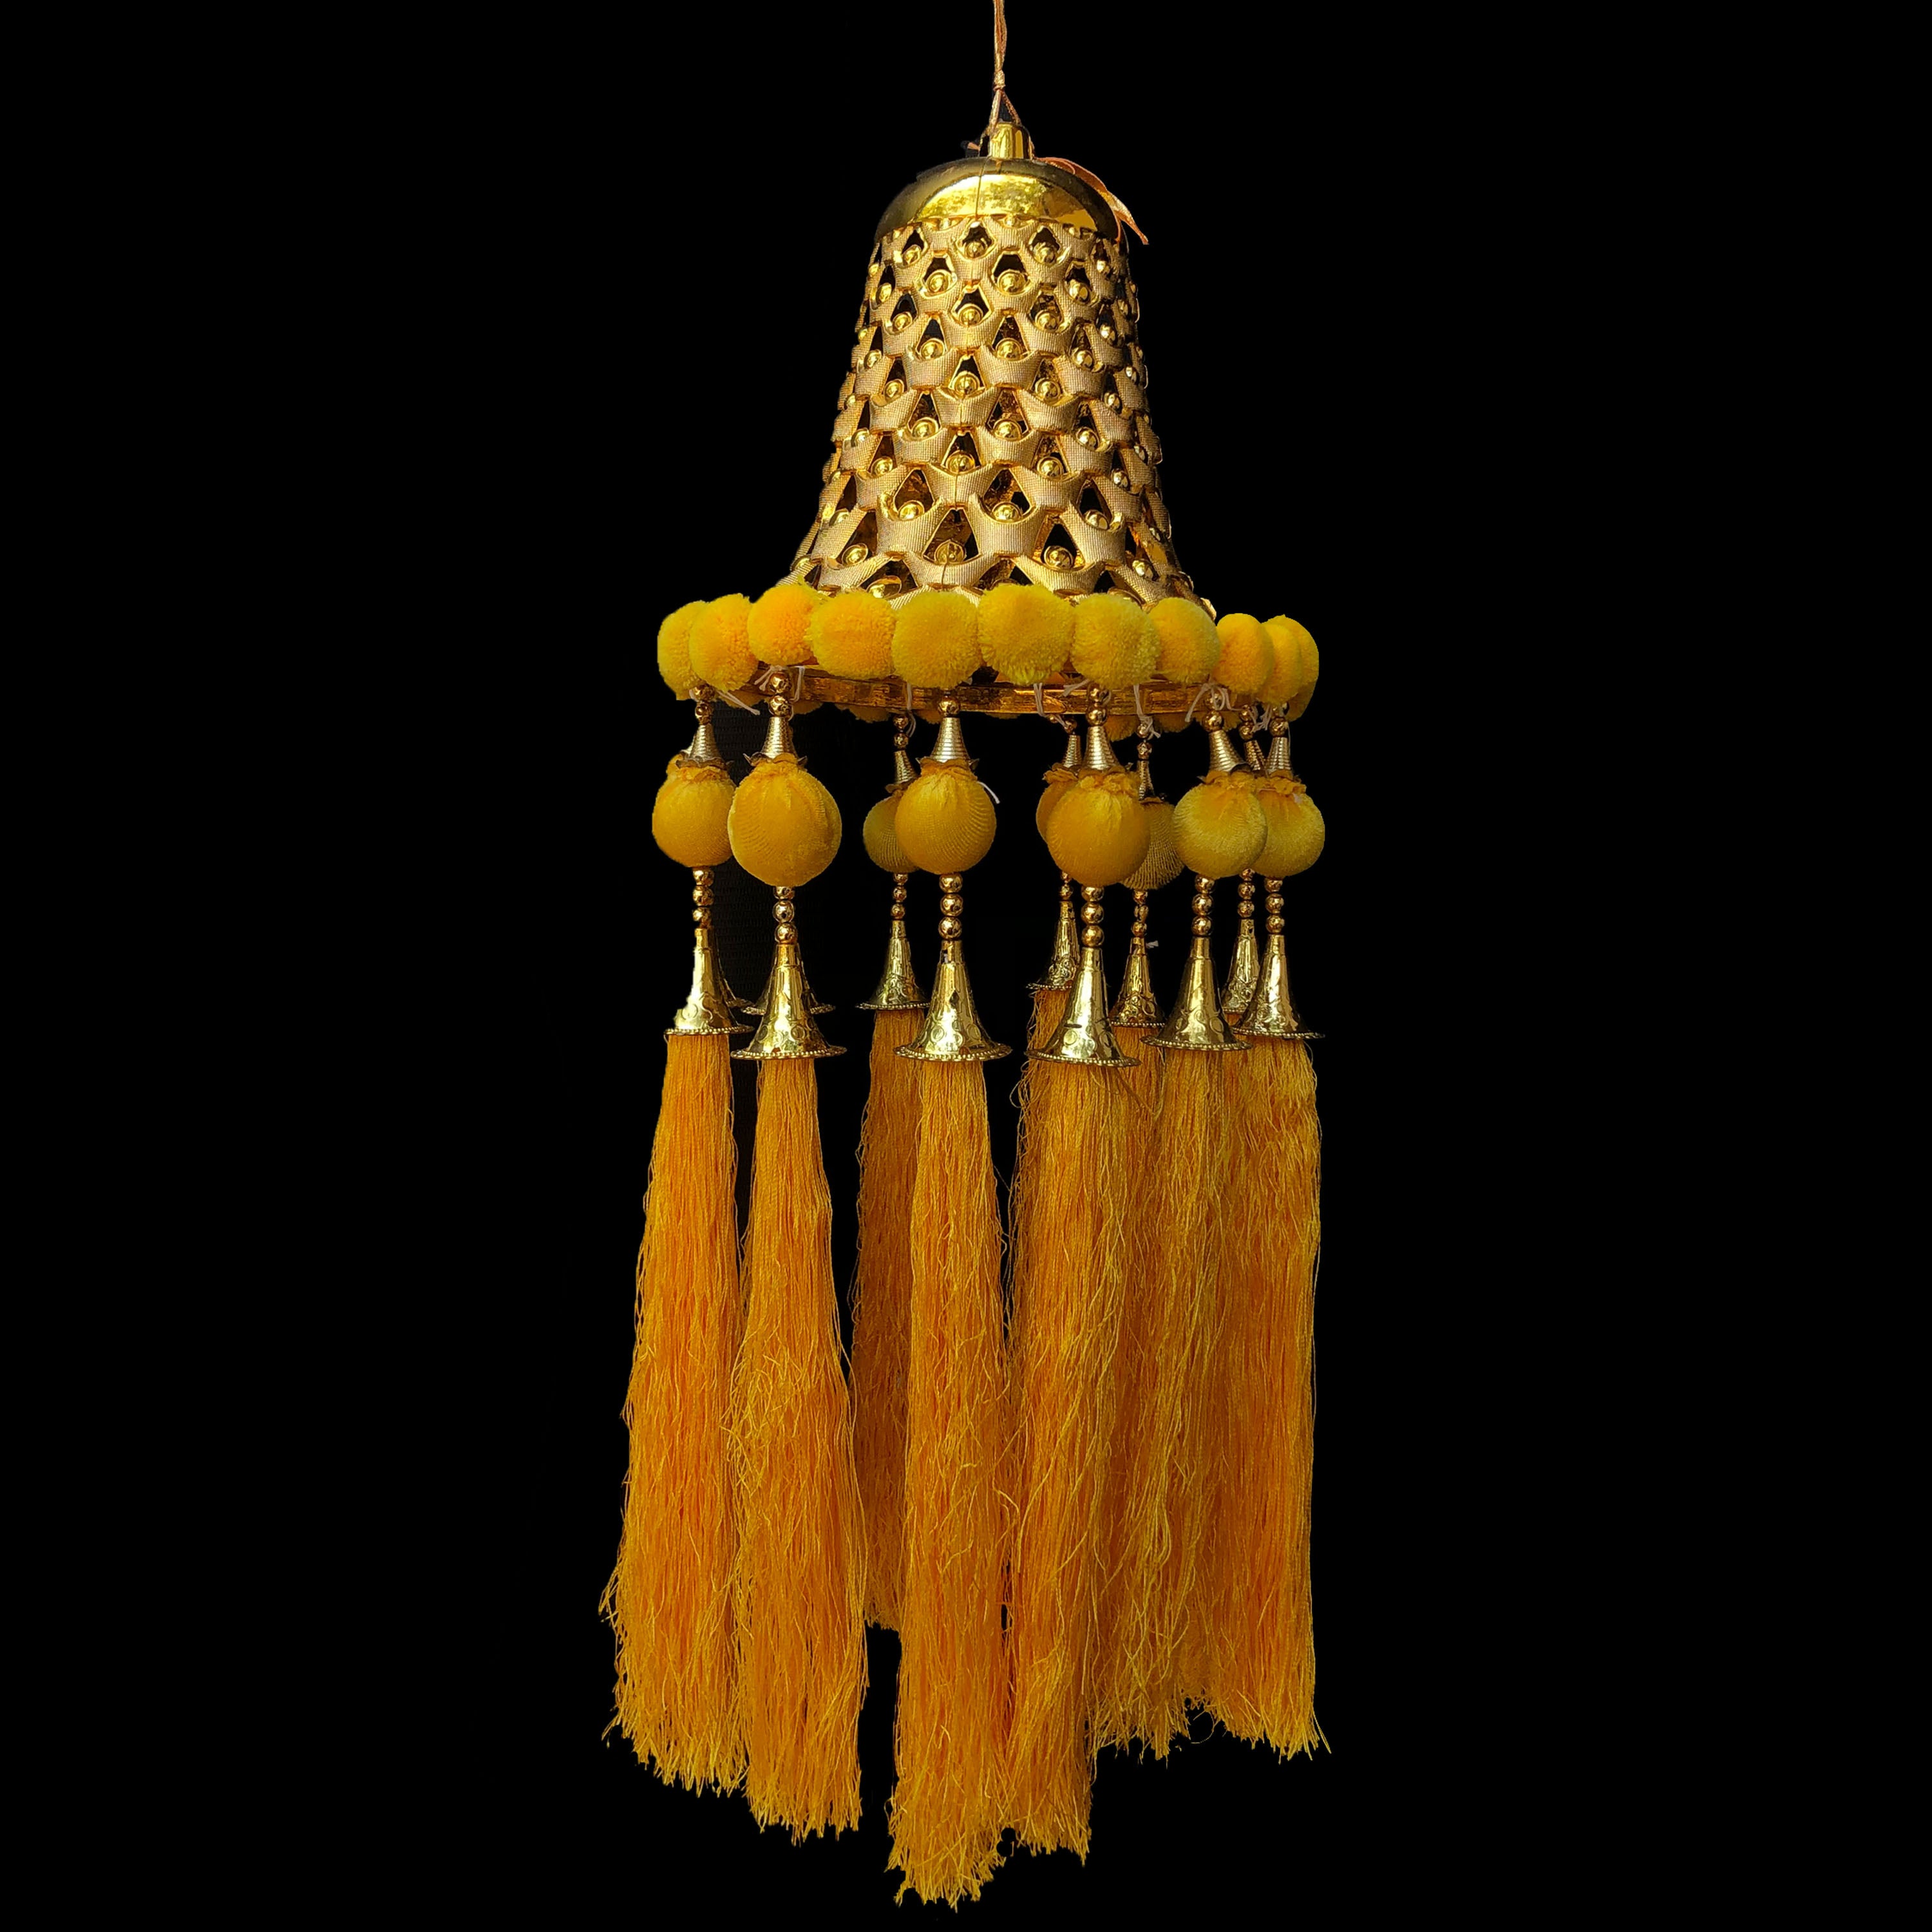 Hanging Bell with Tassels